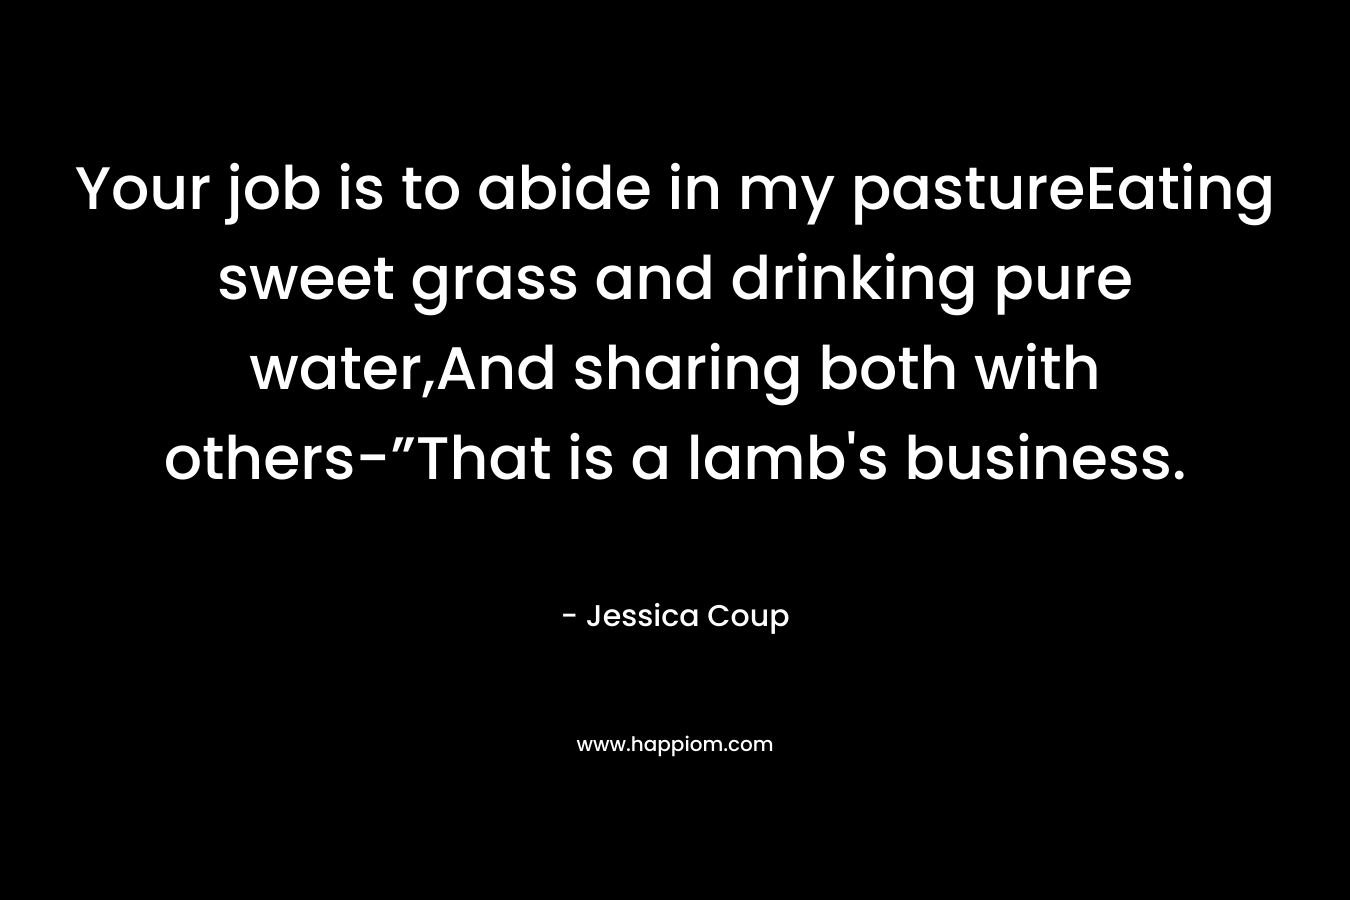 Your job is to abide in my pastureEating sweet grass and drinking pure water,And sharing both with others-”That is a lamb’s business. – Jessica Coup